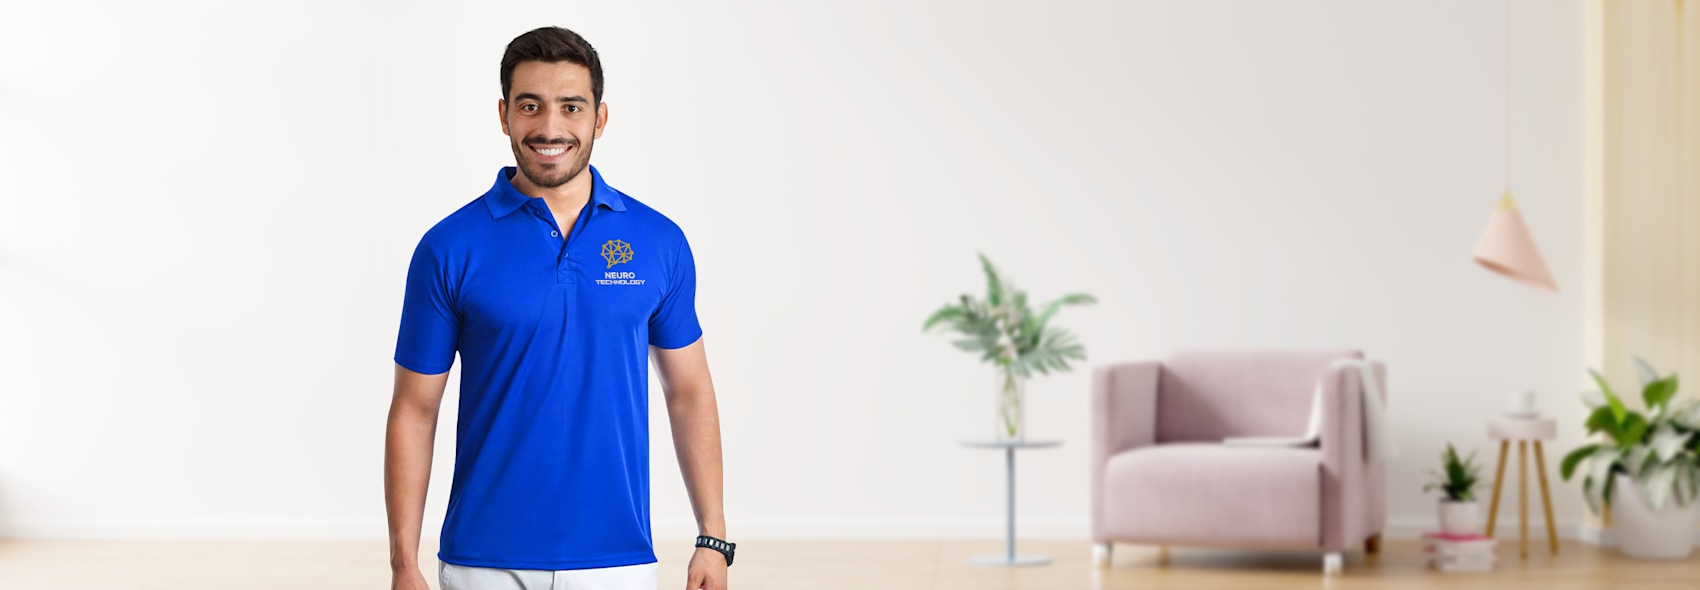 Larger version: Basic Polyester Polo T-Shirts